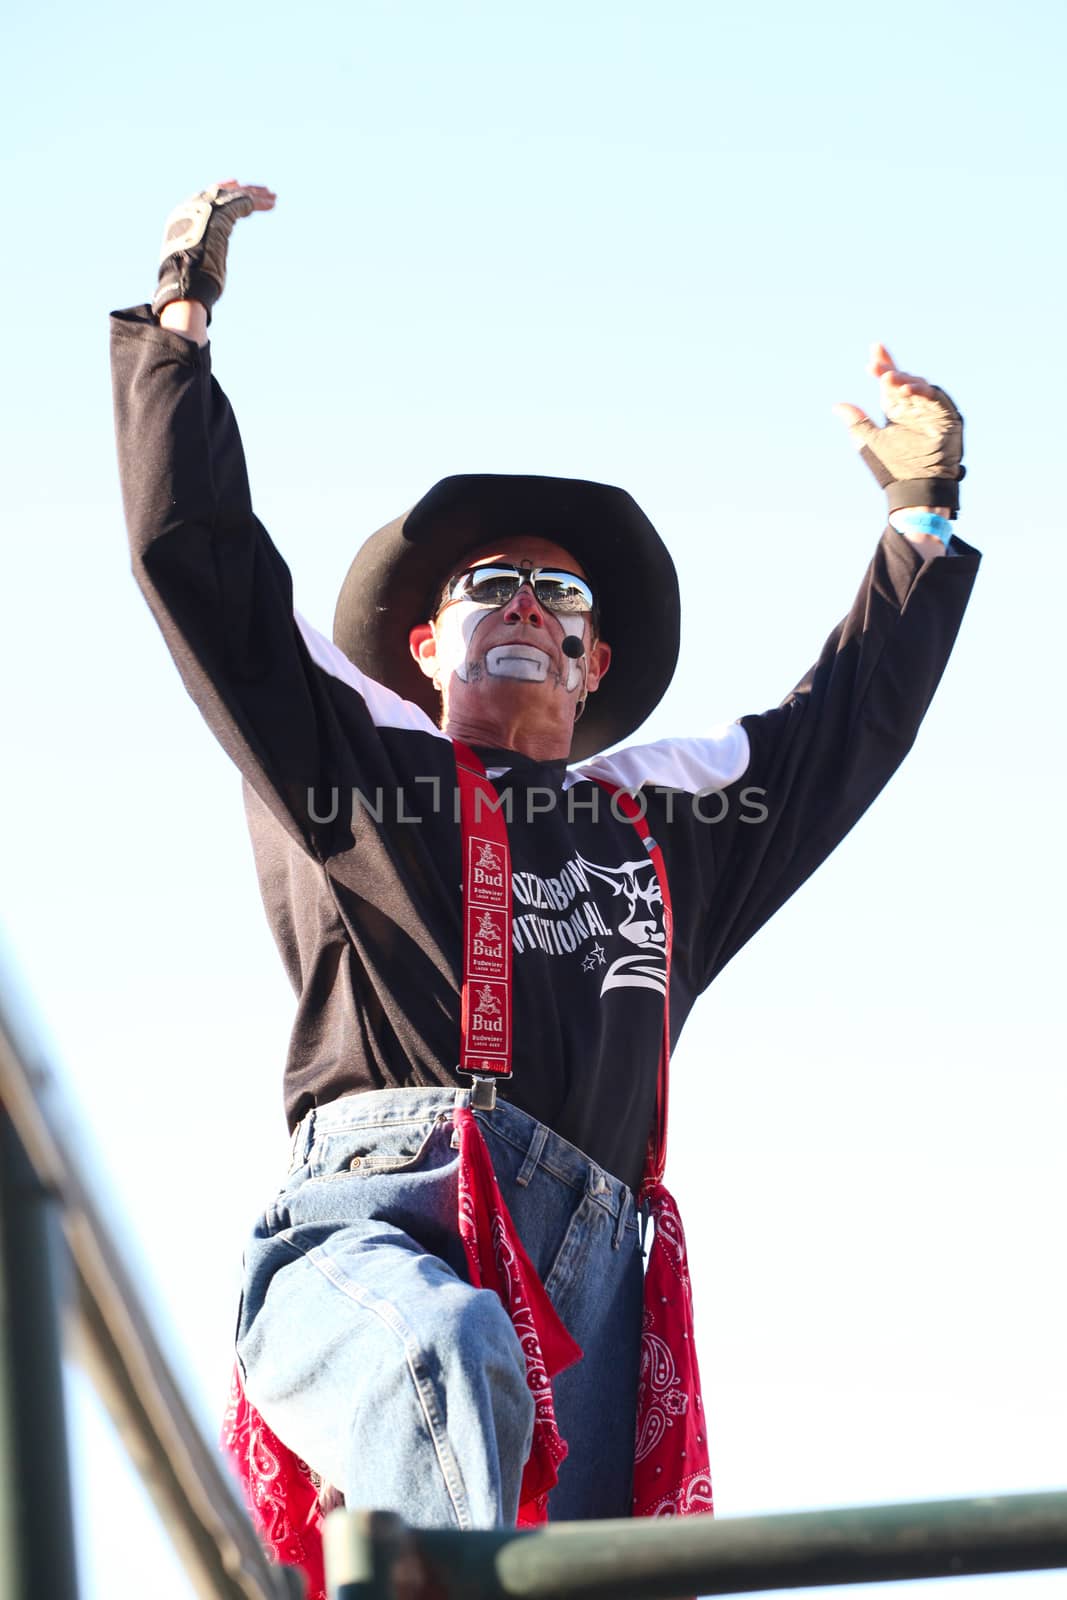 MERRITT, B.C. CANADA - May 30, 2015: Rodeo clown at The 3rd Annual Ty Pozzobon Invitational PBR Event.